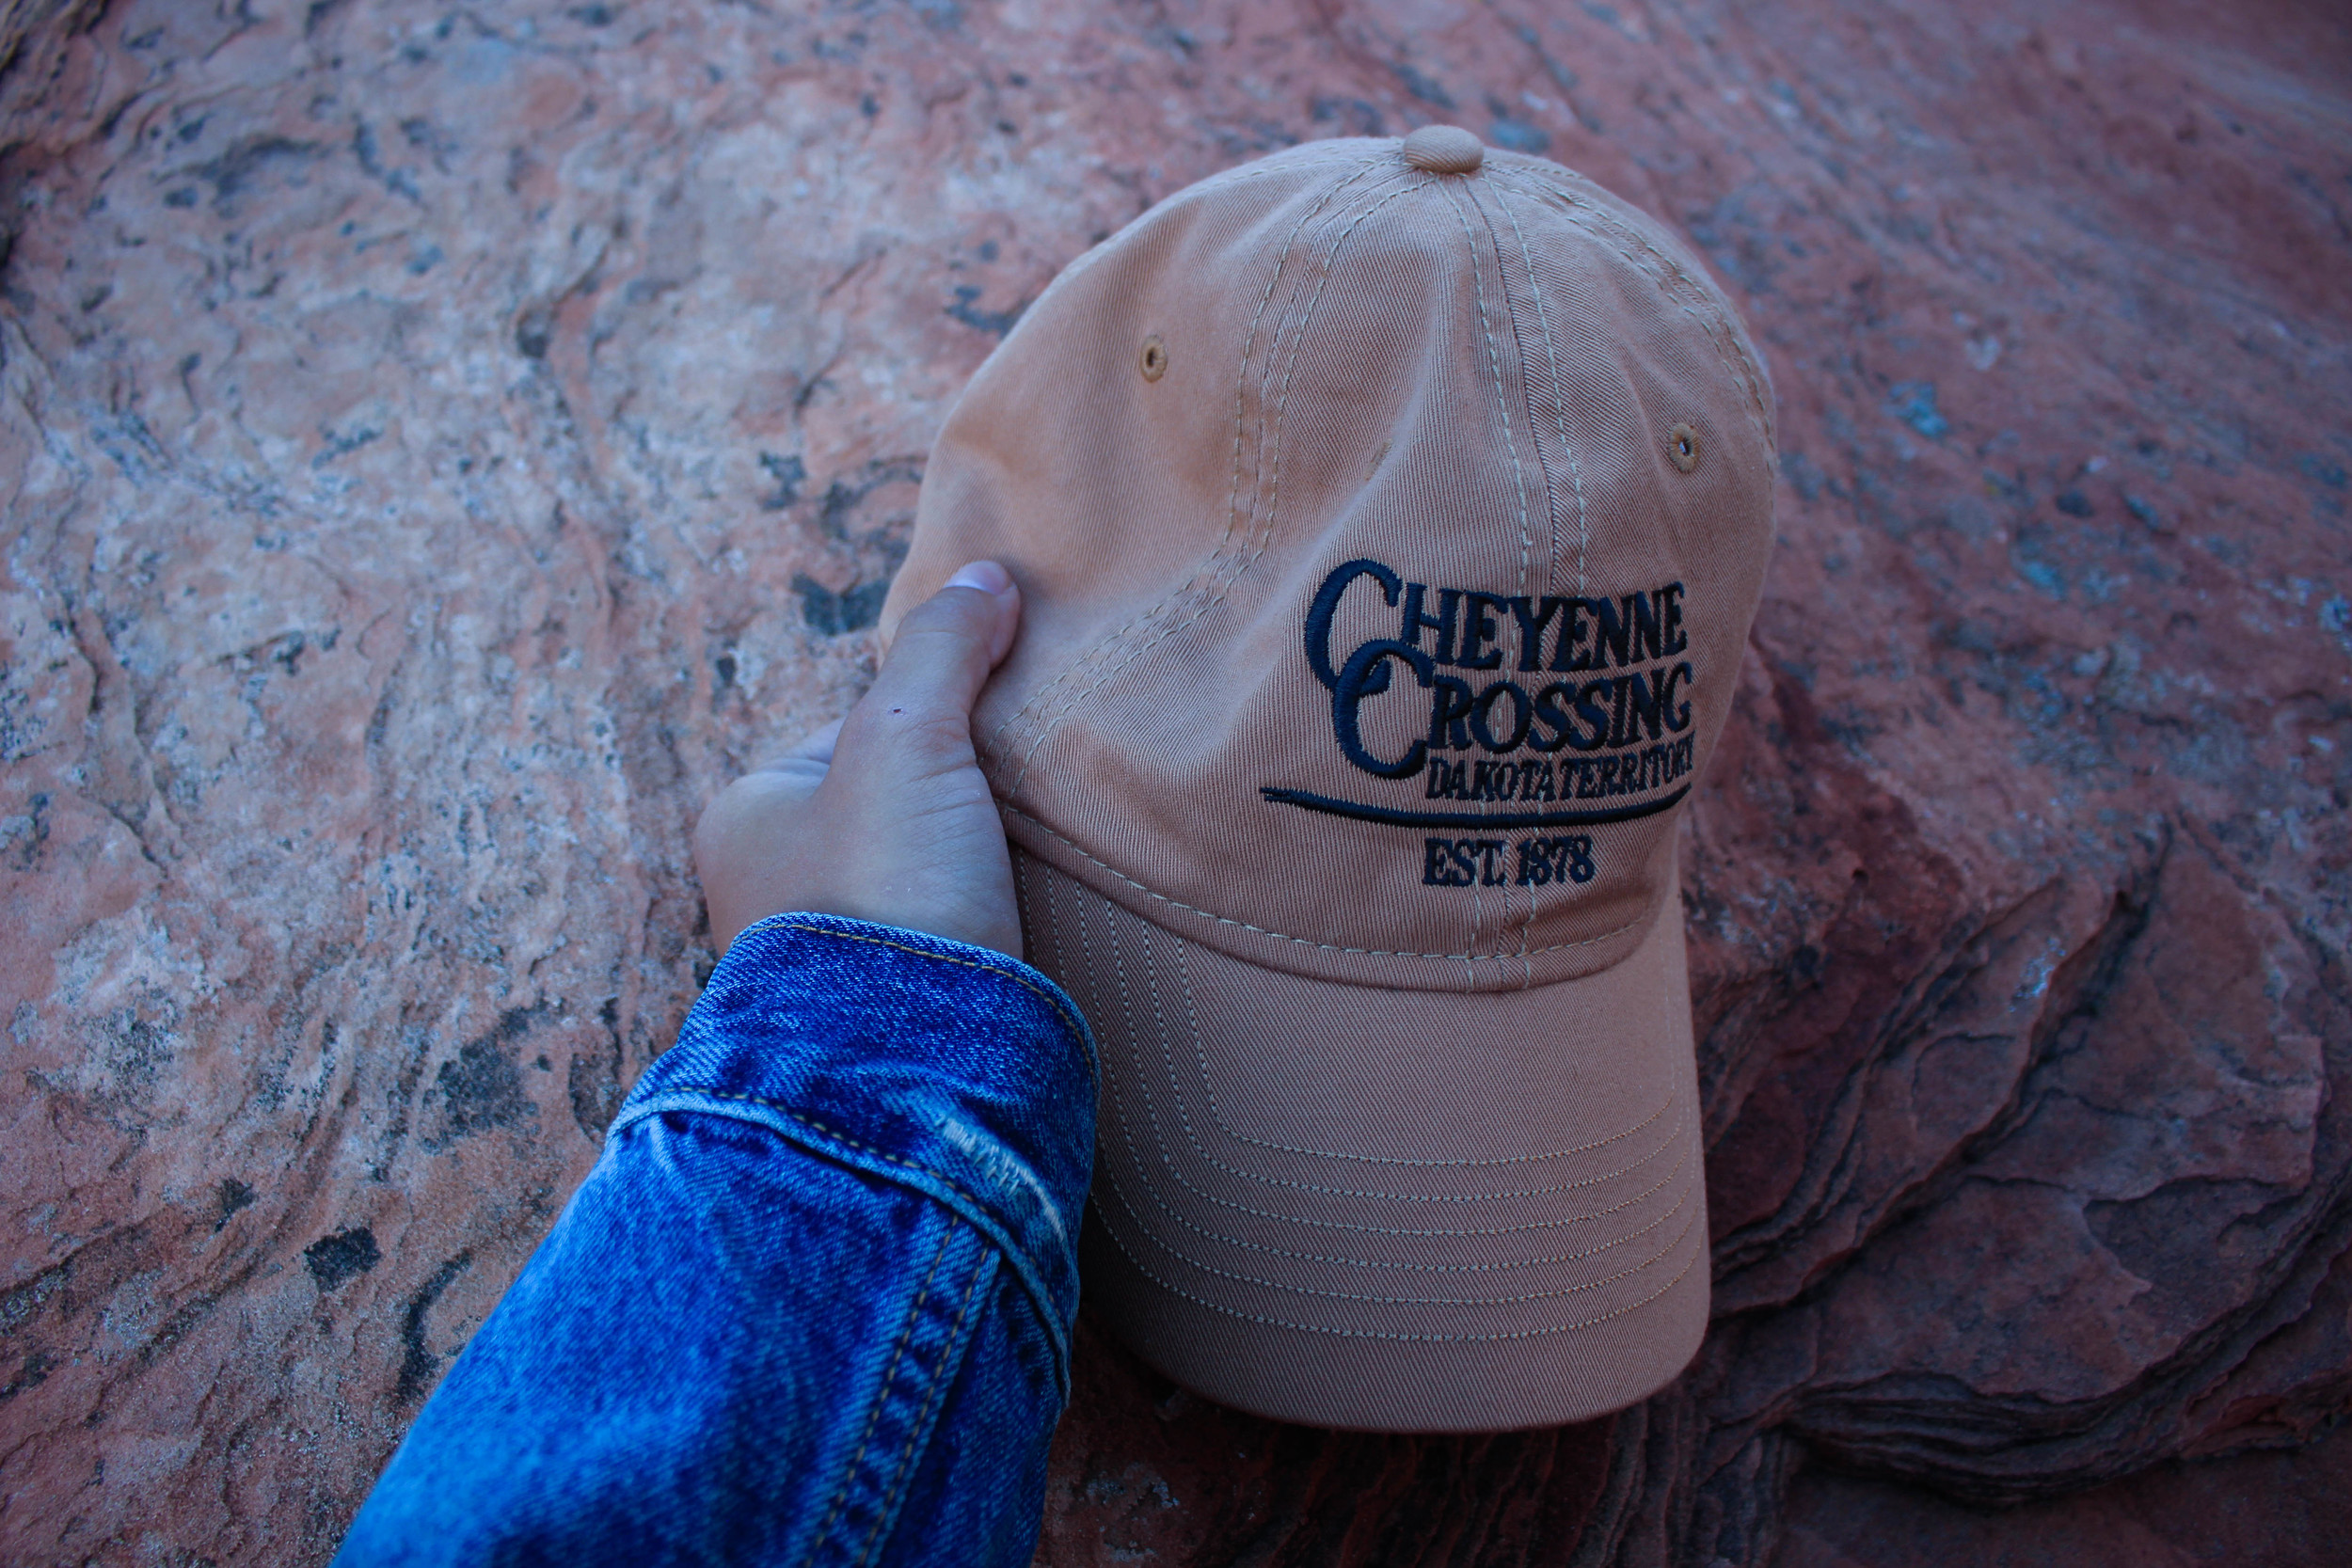  My cap from Cheyenne Crossing in the Black Hills pictured in Zion National Park, Utah. 